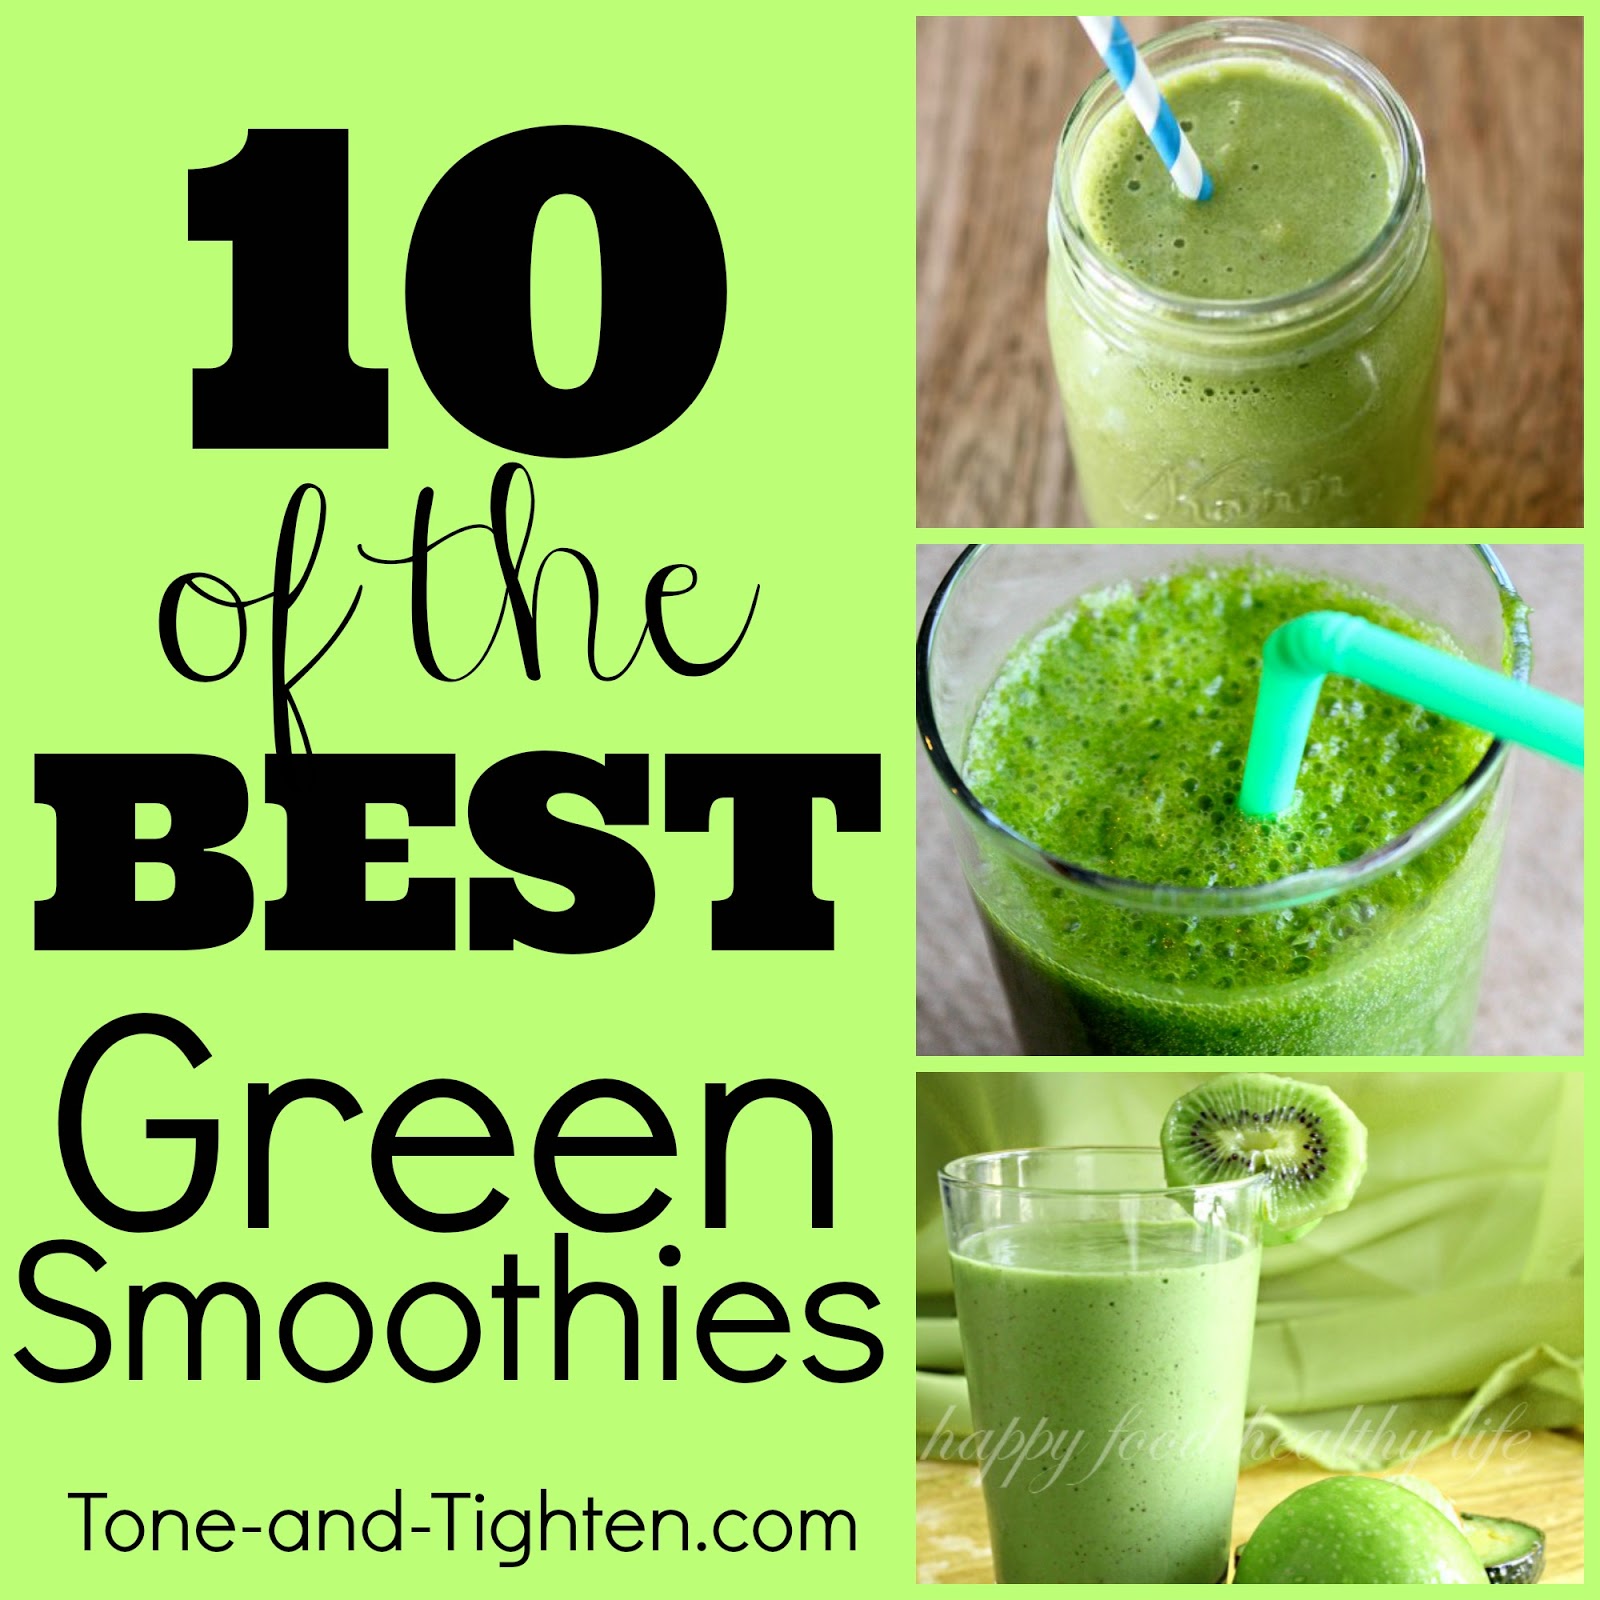 10 of the Best Green Smoothie Recipes | Tone and Tighten